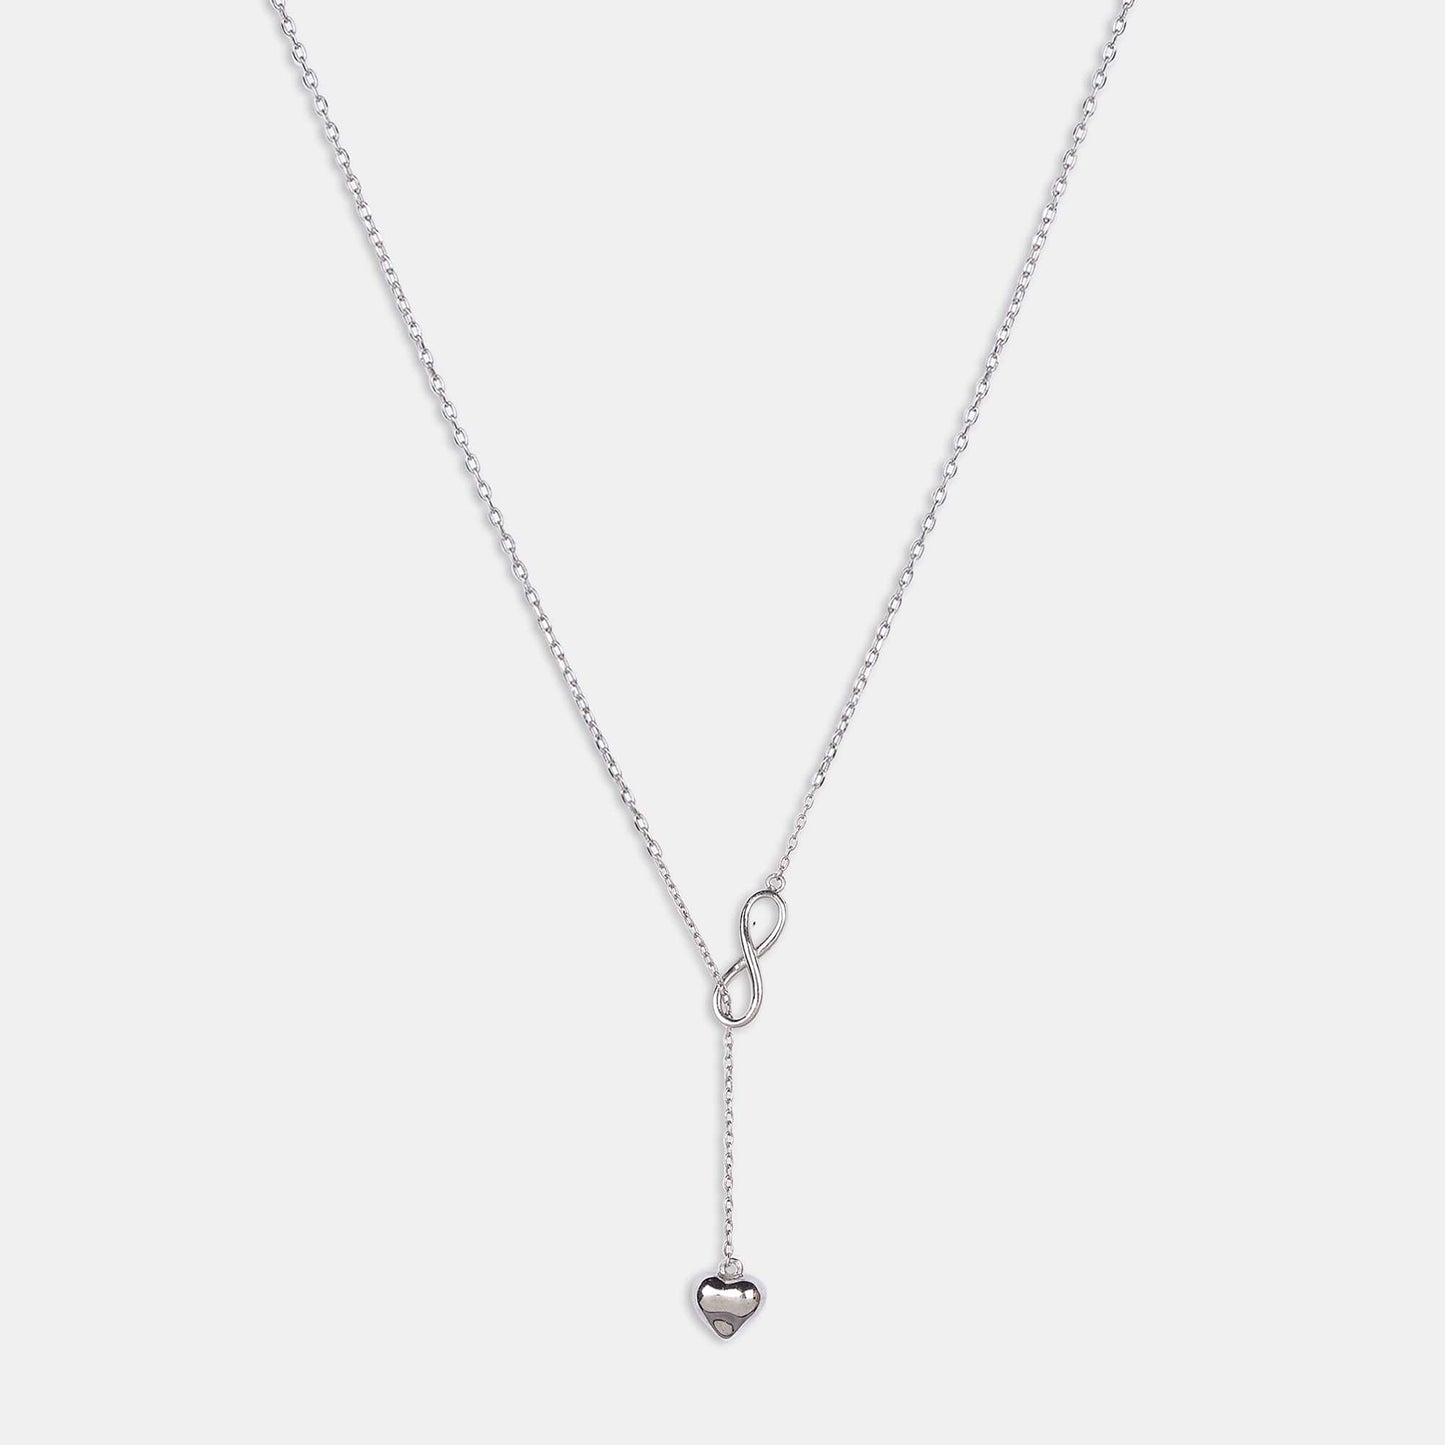 Discover the elegance of our silver Love Raindrop Pendant